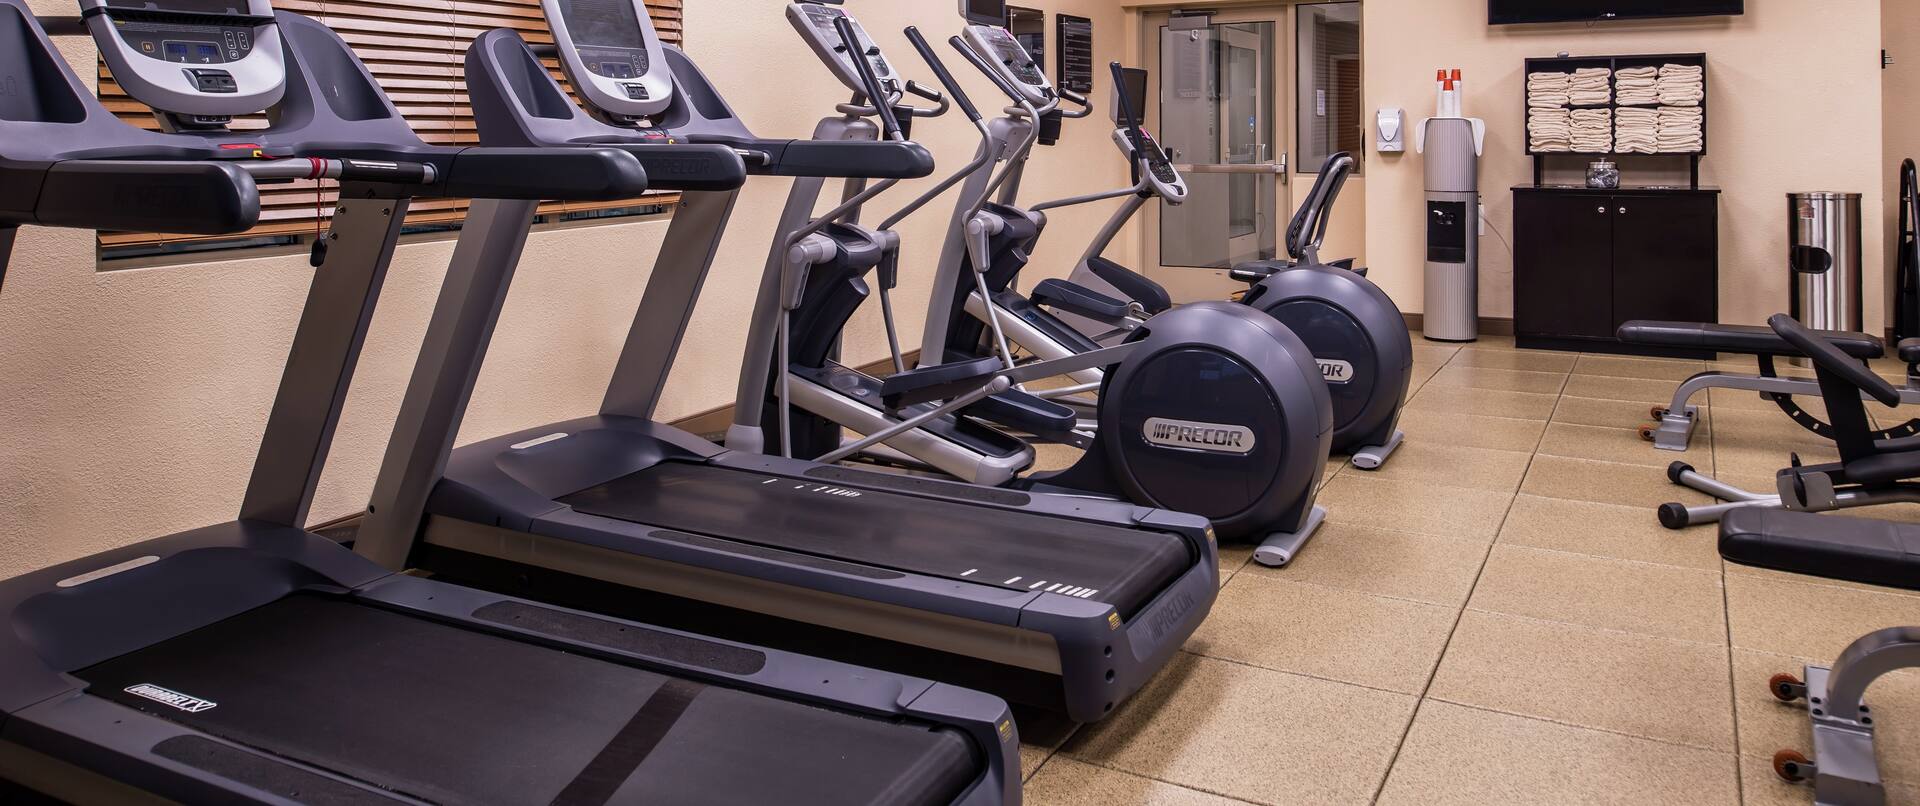 Fitness Center with Treadmills, Cross-Trainers and Weight Benches